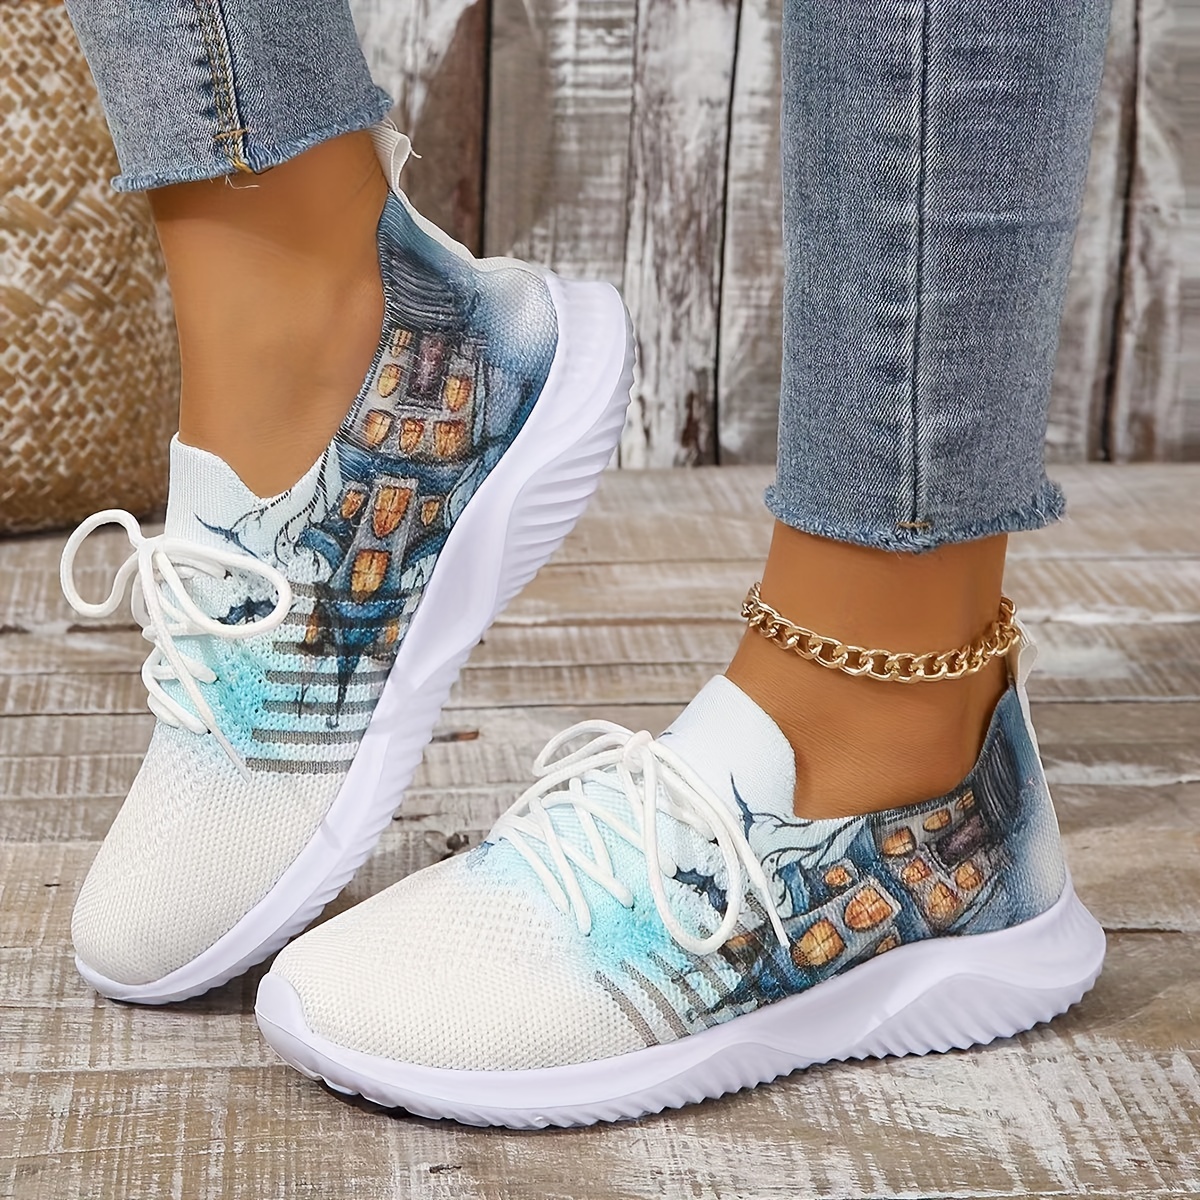 2021 Fashion Women Sneakers Casual Shoes Ladies Trainers White